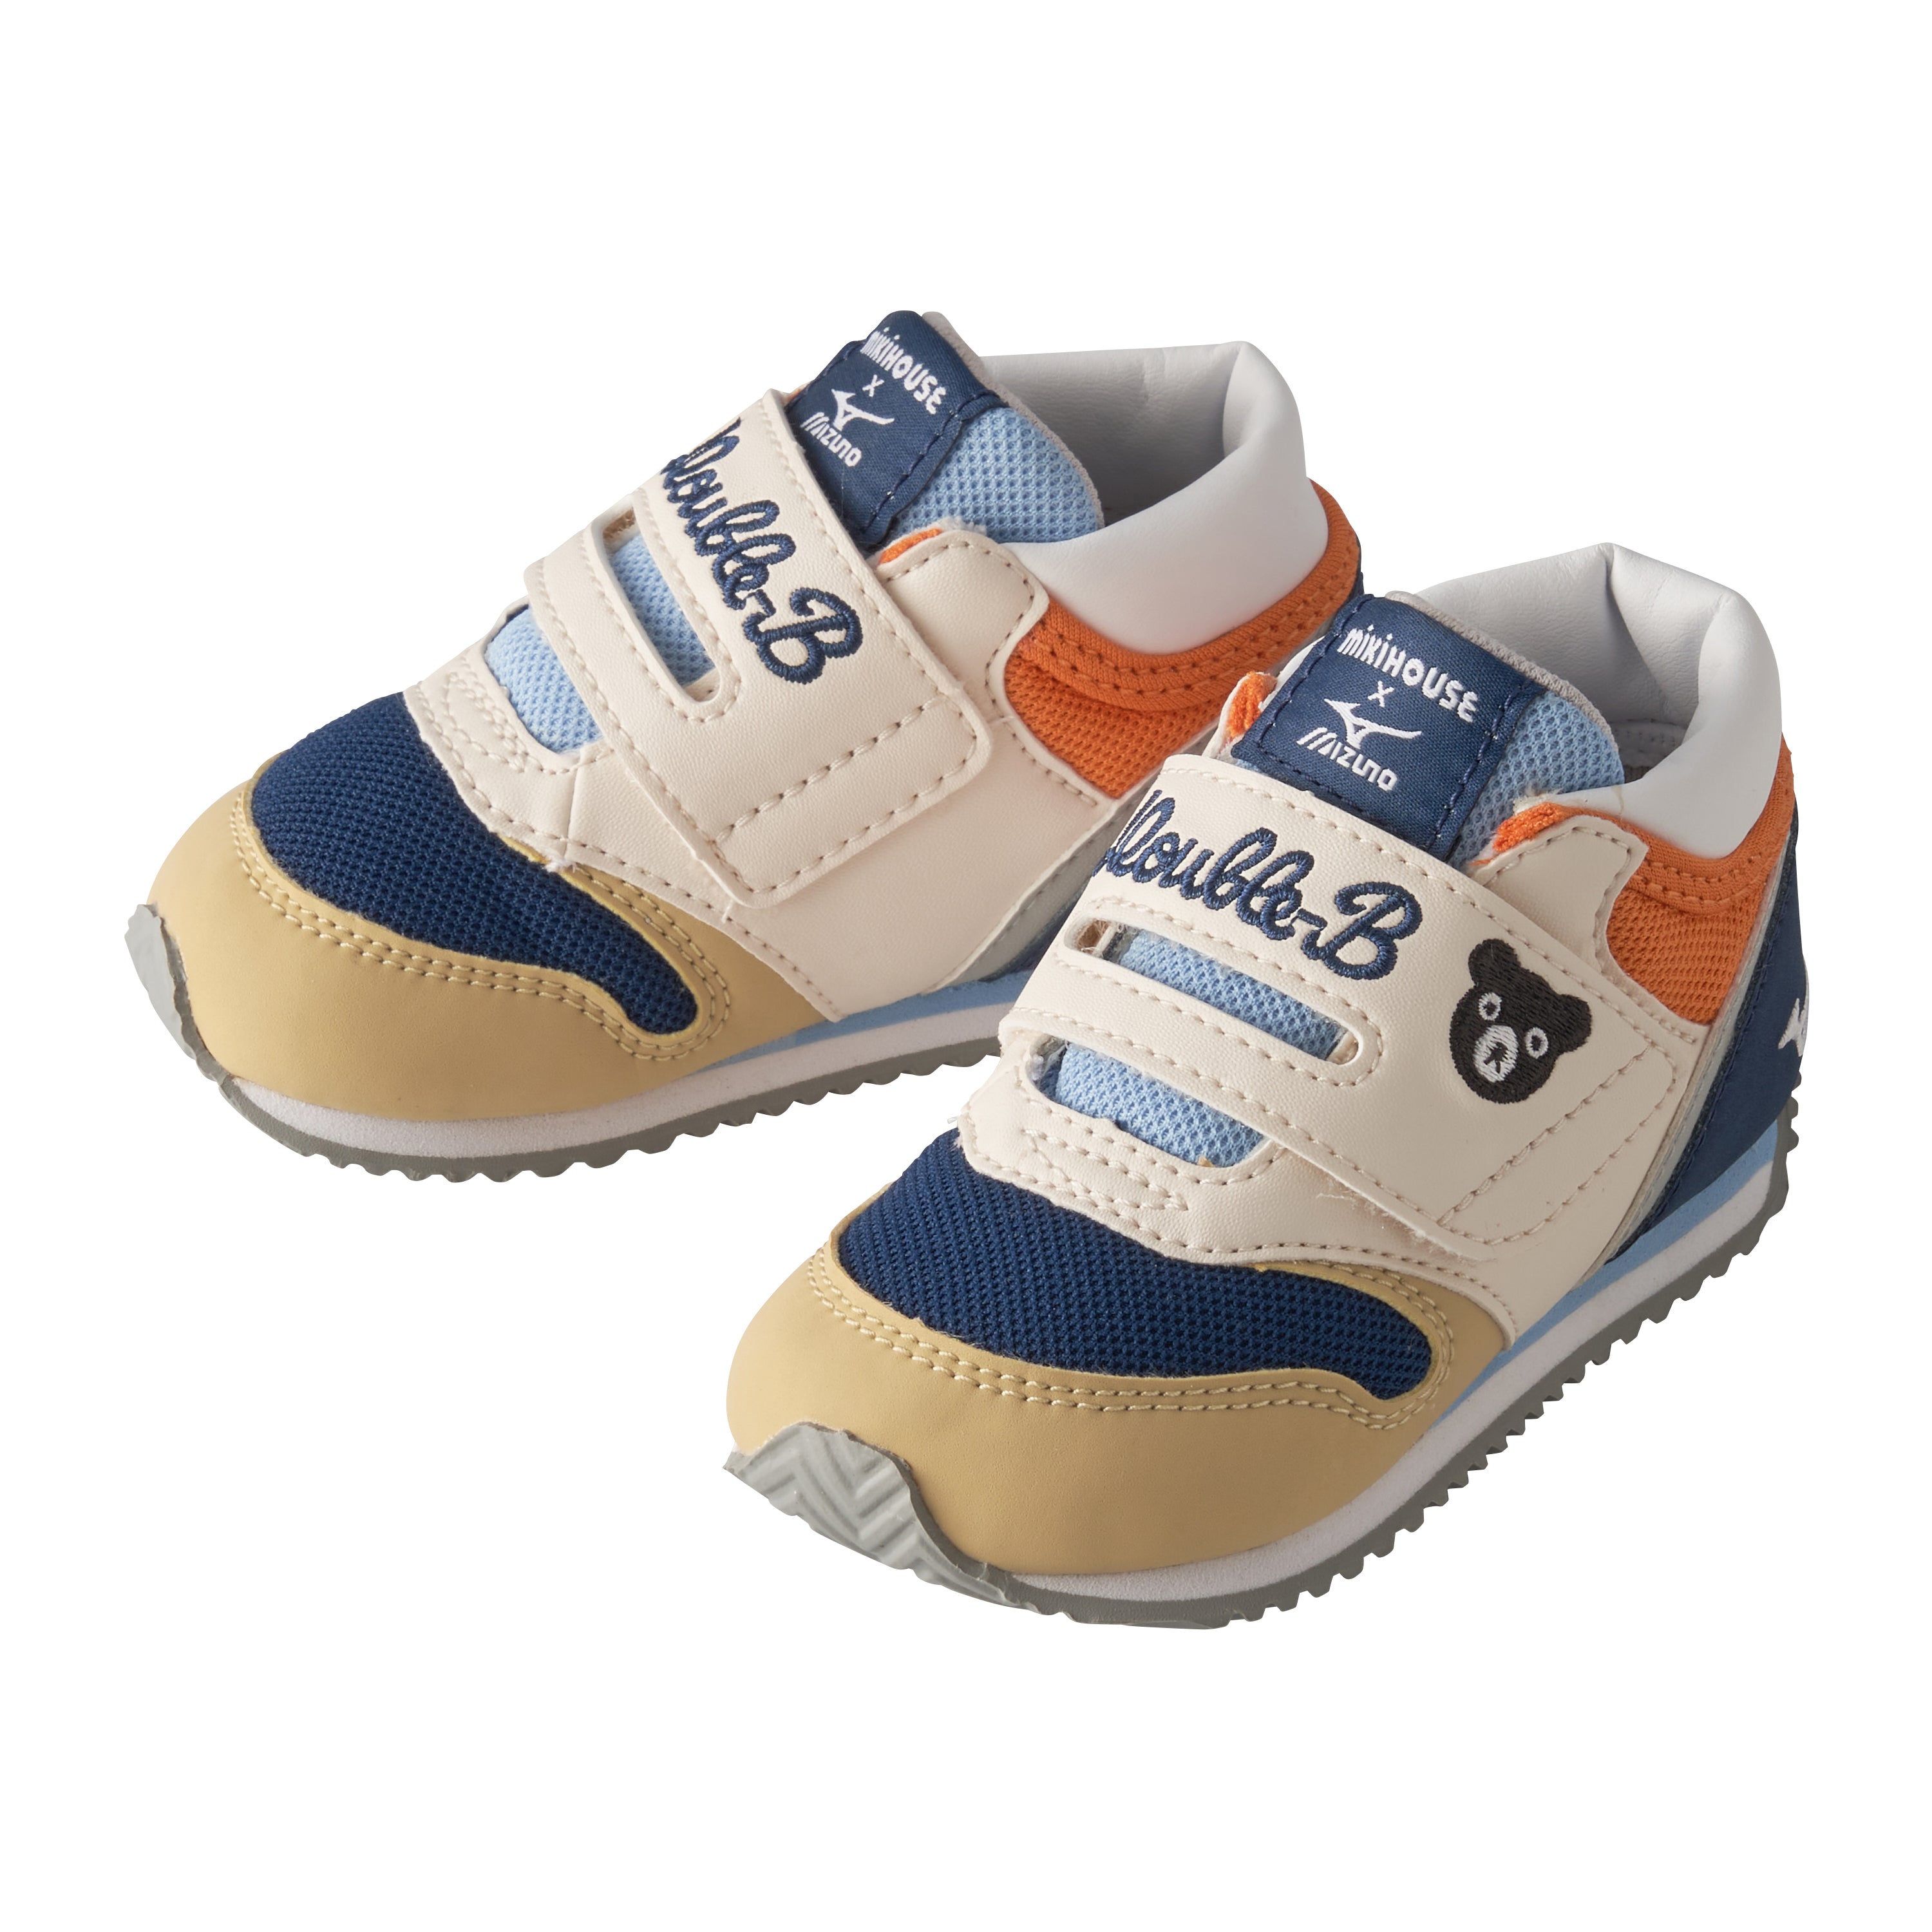 DOUBLE_B BABY SHOES